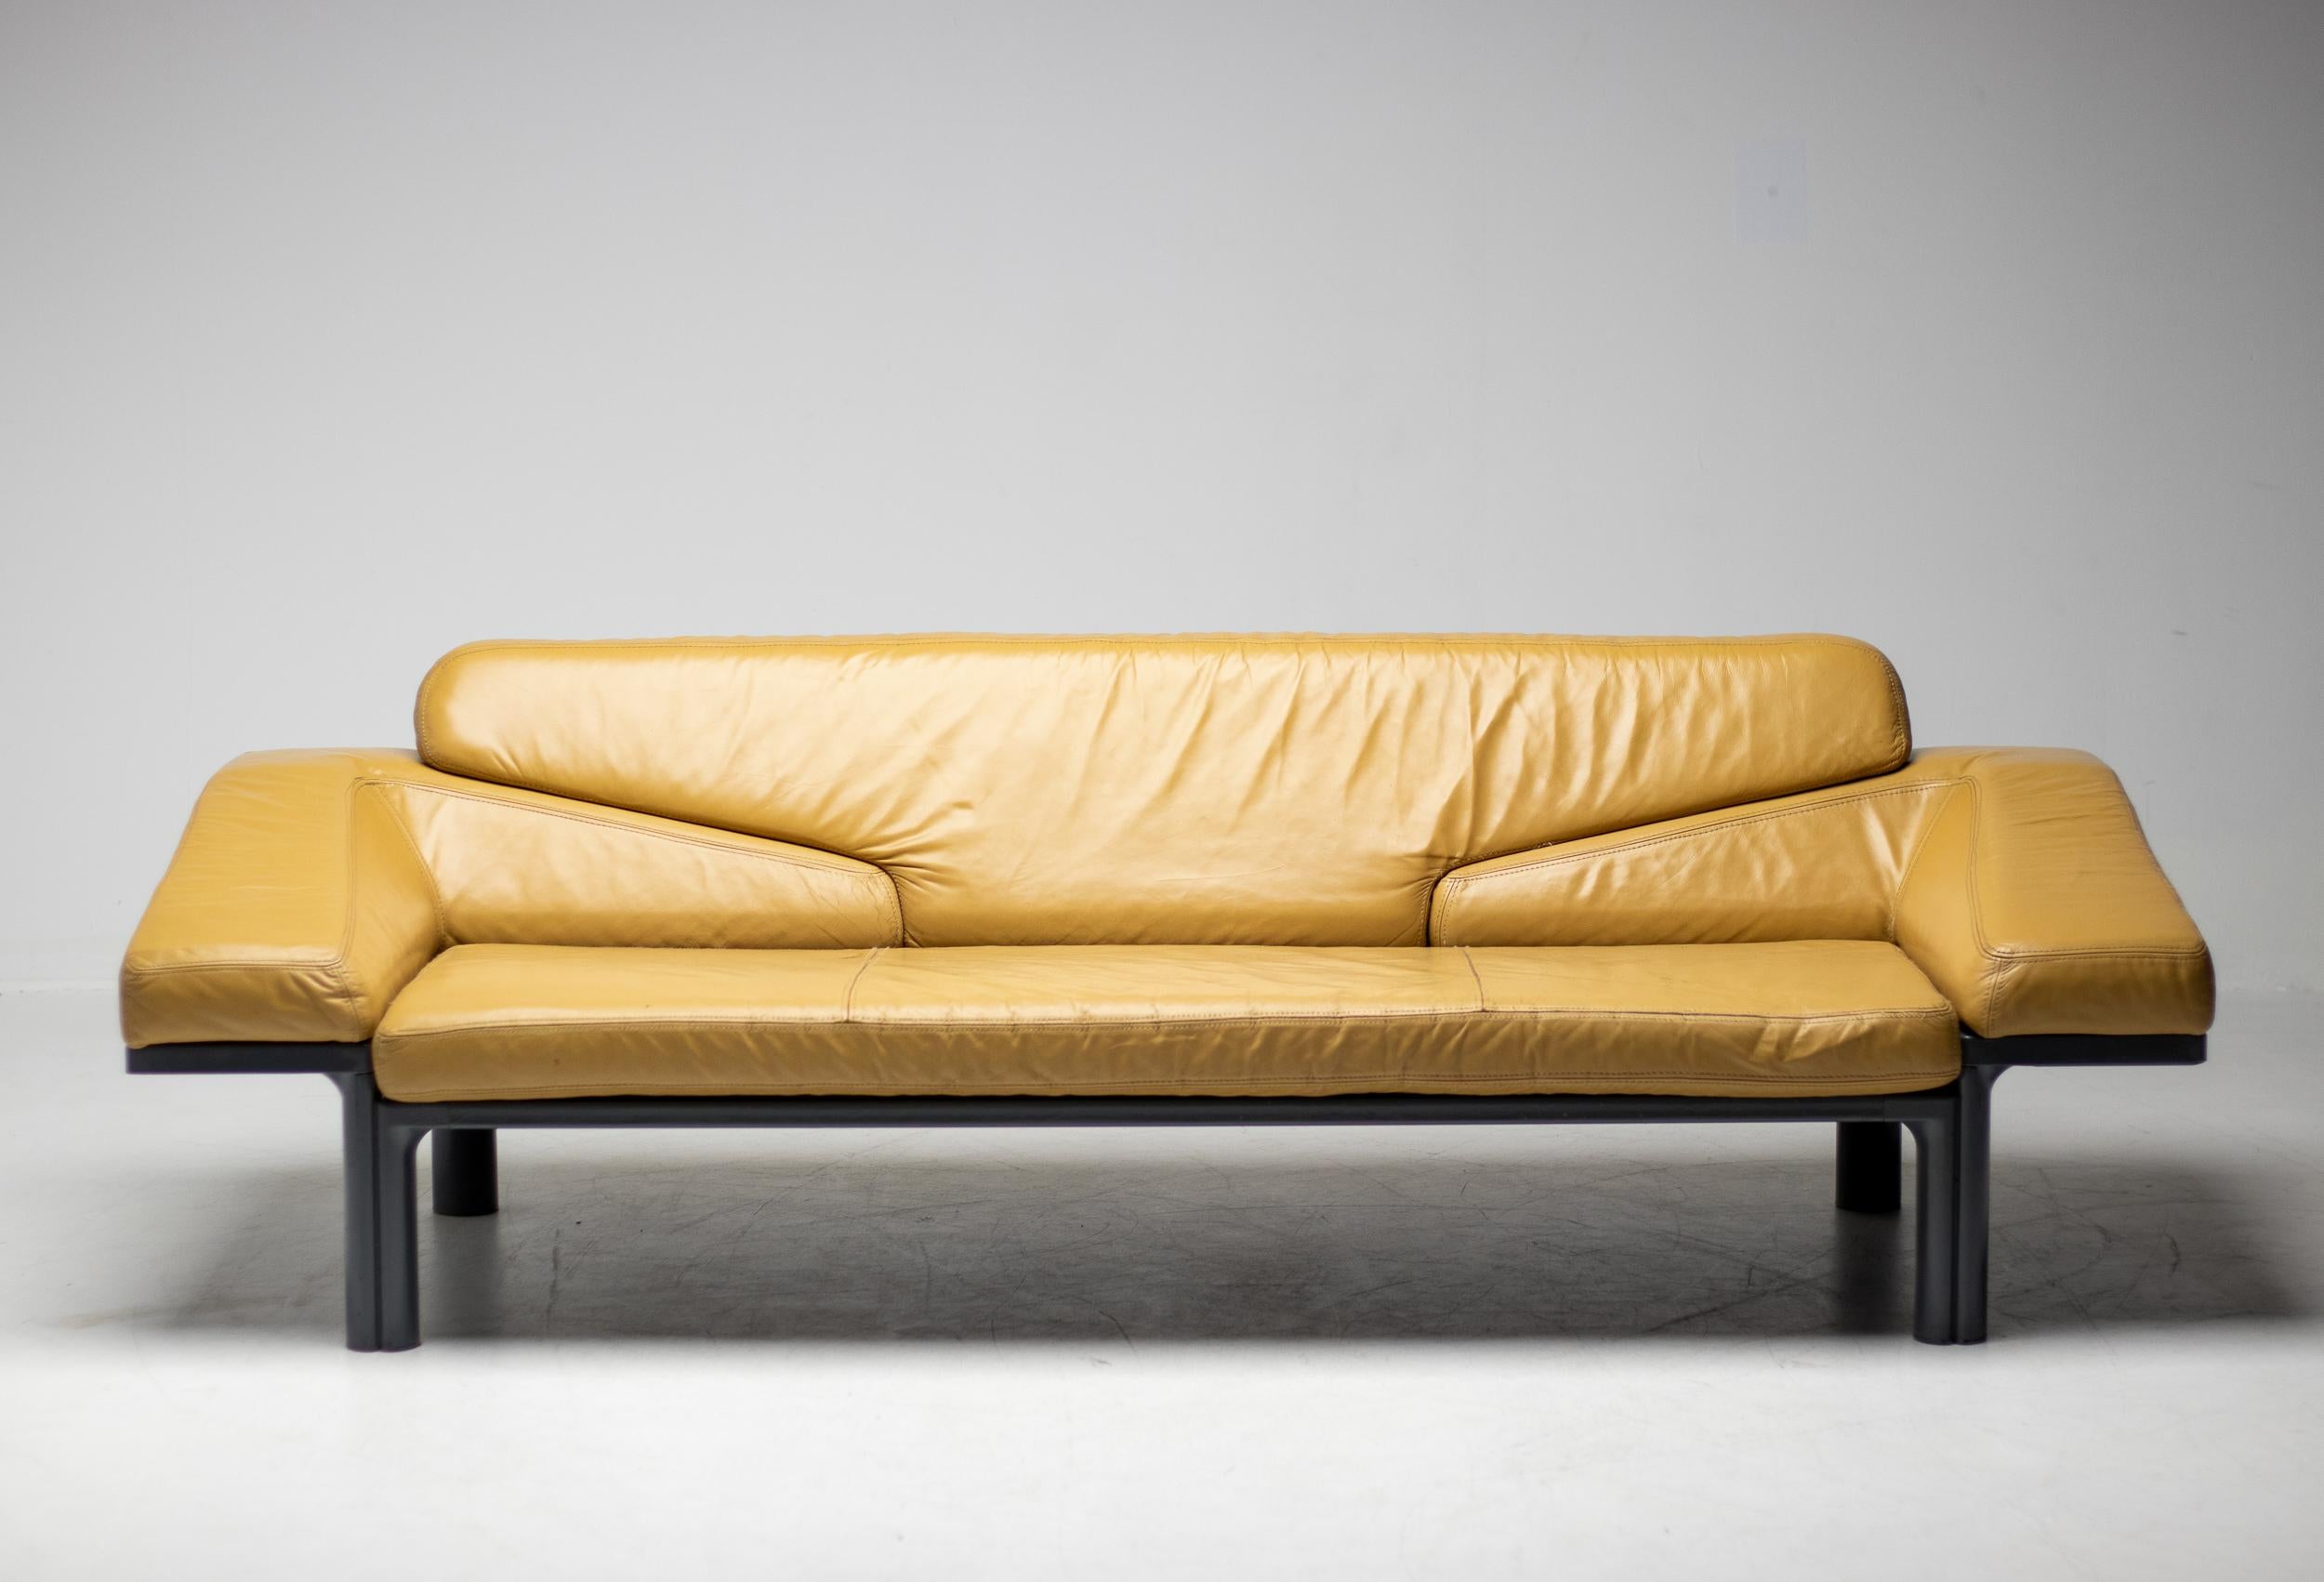 Versatile space-age sofa designed in 1972 by Wolfgang Muller for Artifort.
With the armrests removed the sofa offers a side table on both sides, a very practical transformation.
The leather is in good condition and still supple, but has wear to the